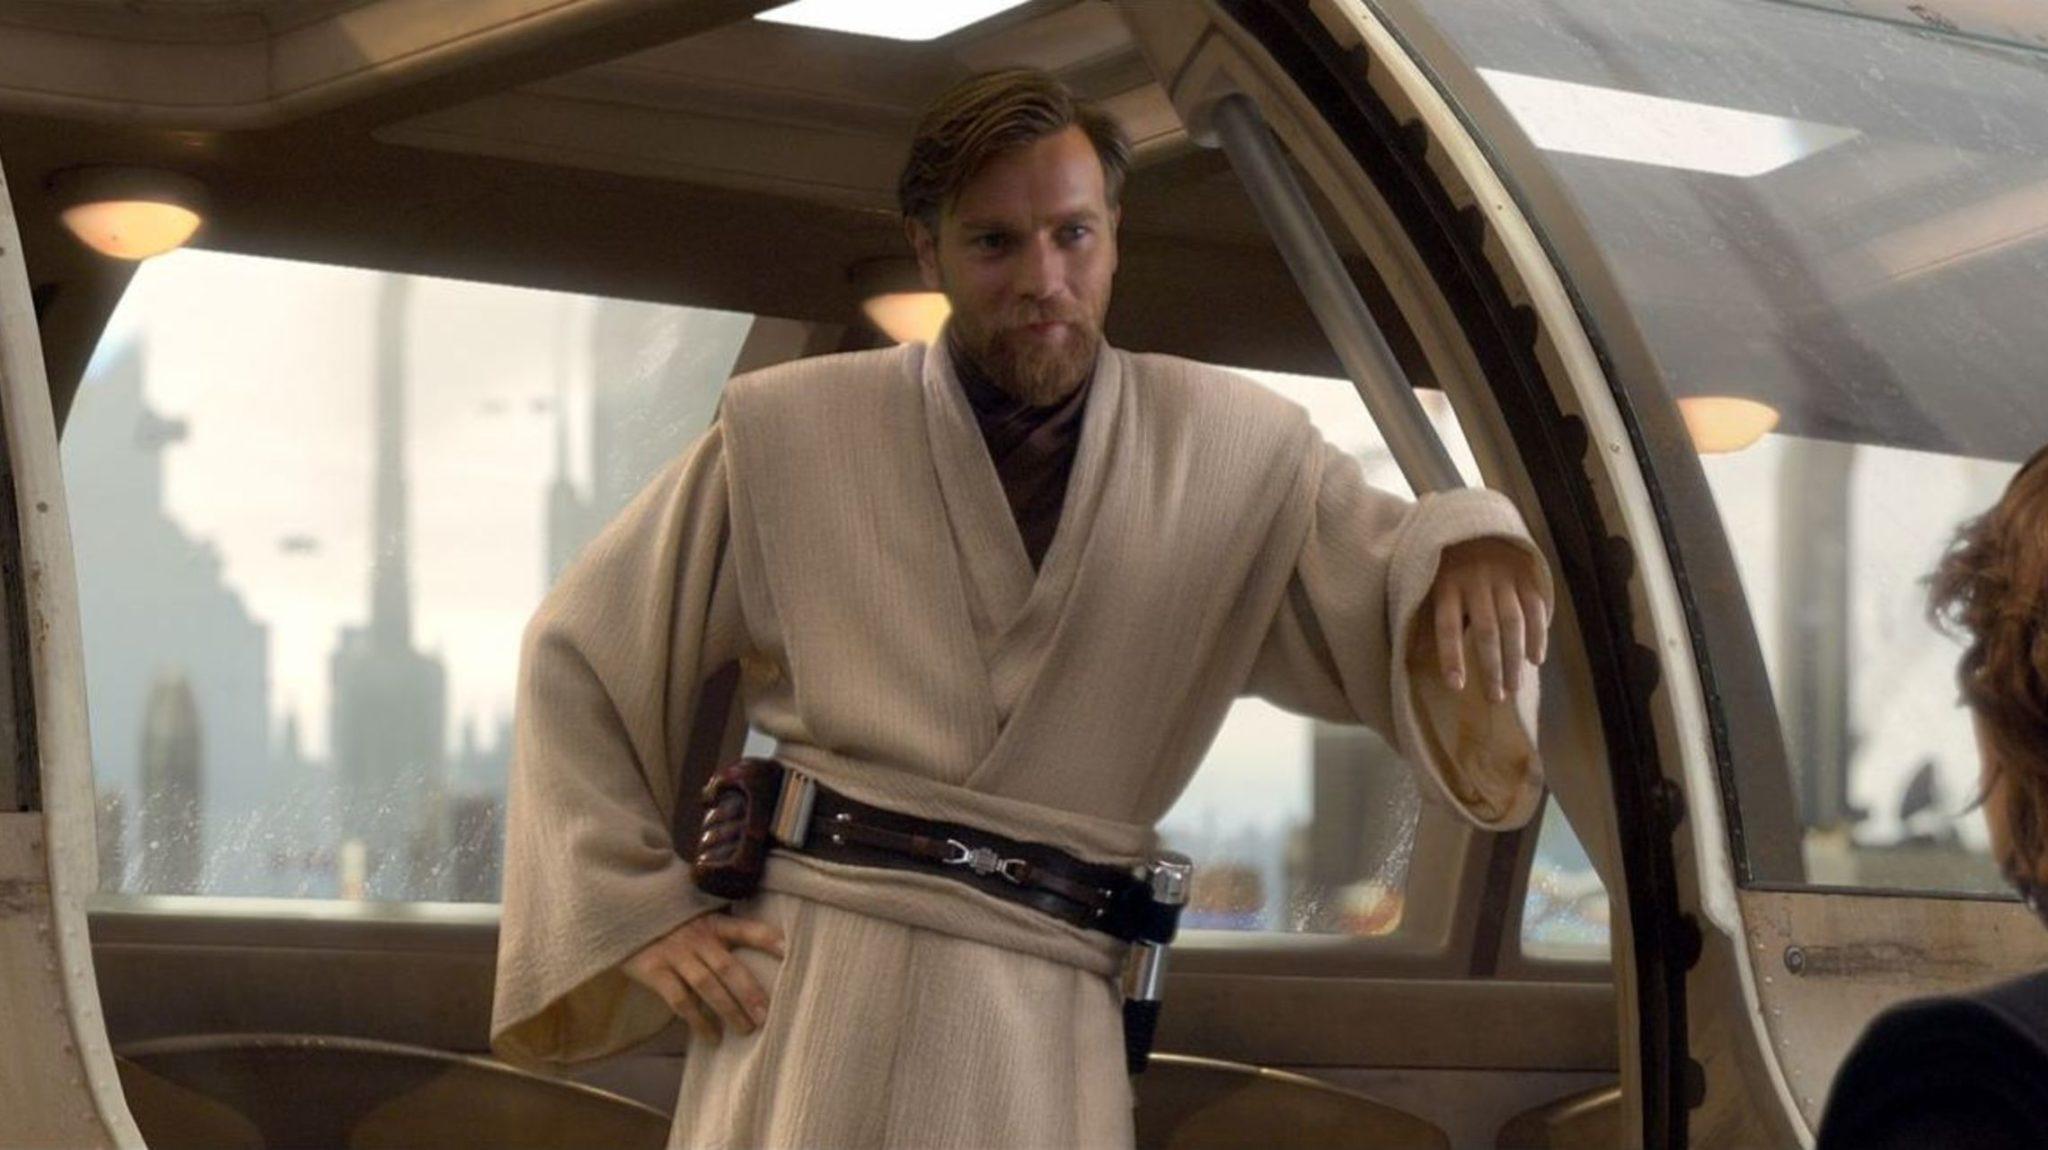 Obi-Wan Kenobi was originally planned to be Rey's grandfather, but that idea was scrapped midway through the trilogy.